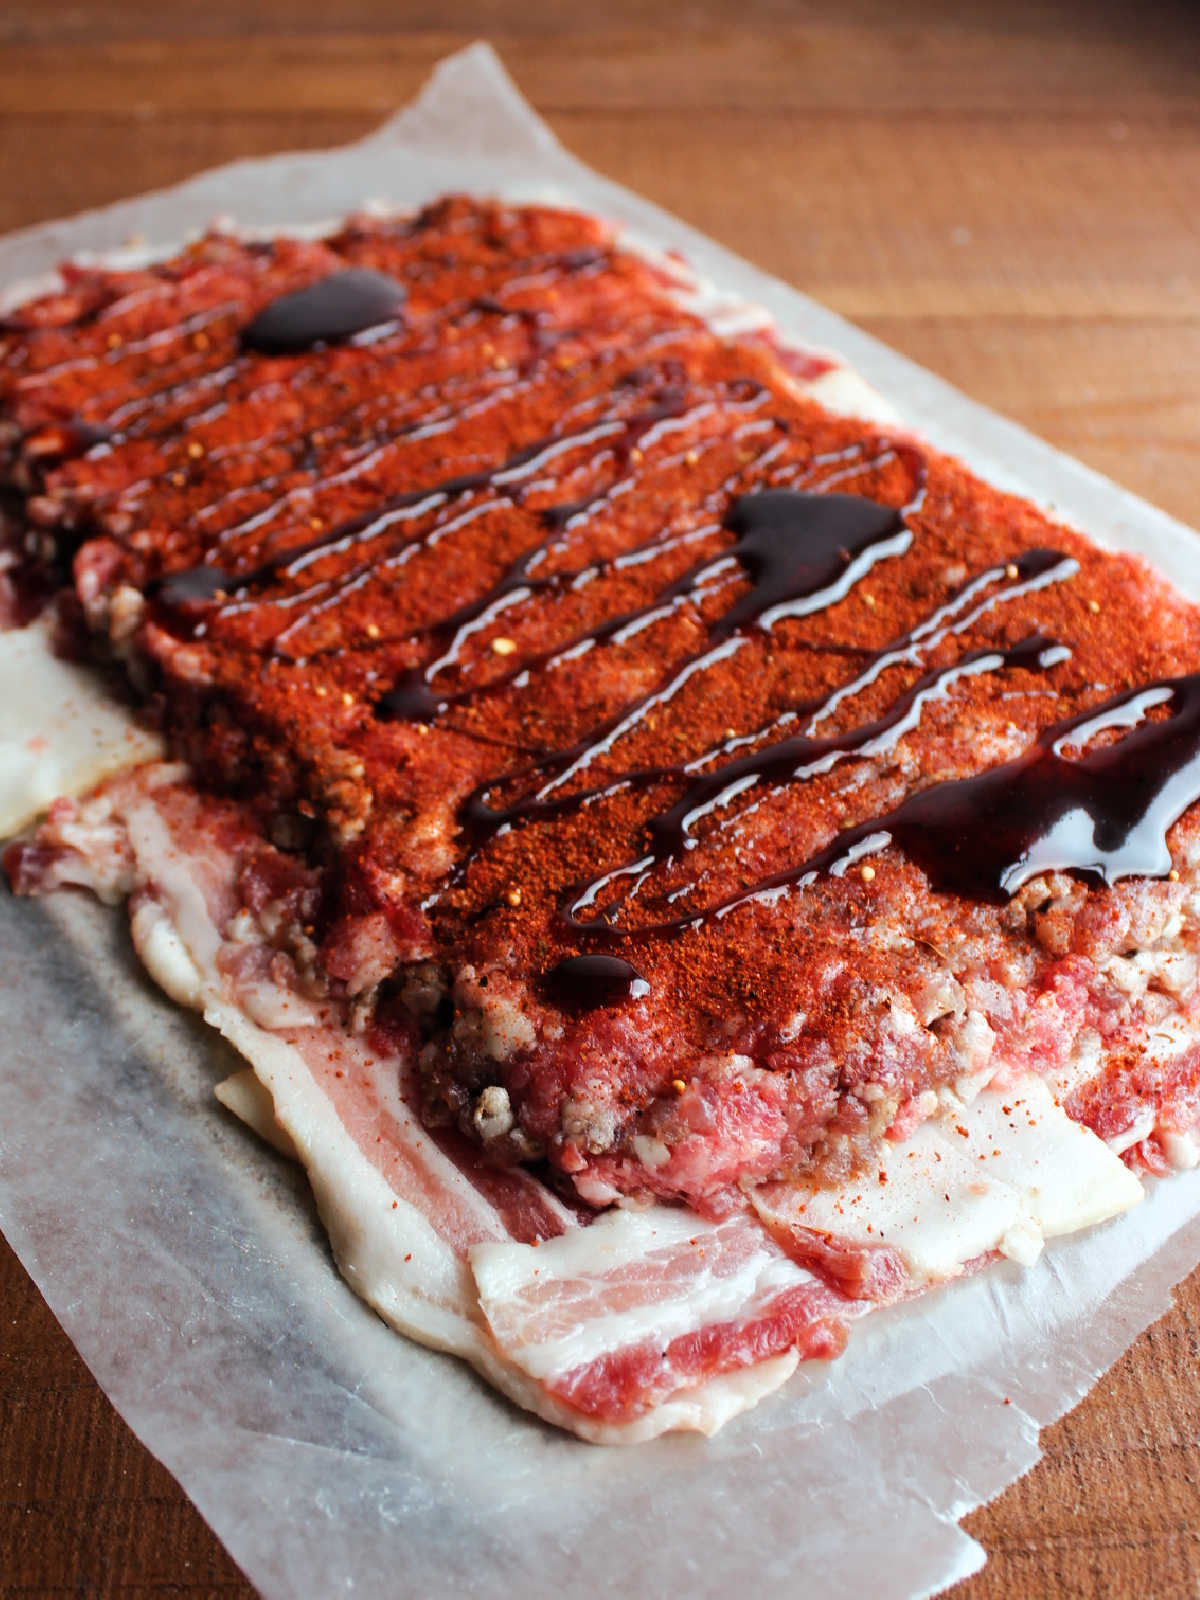 Ground pork and sausage mixture patted into a rectangle on top of the bacon weave then topped with BBQ rub and a drizzle of BBQ sauce.